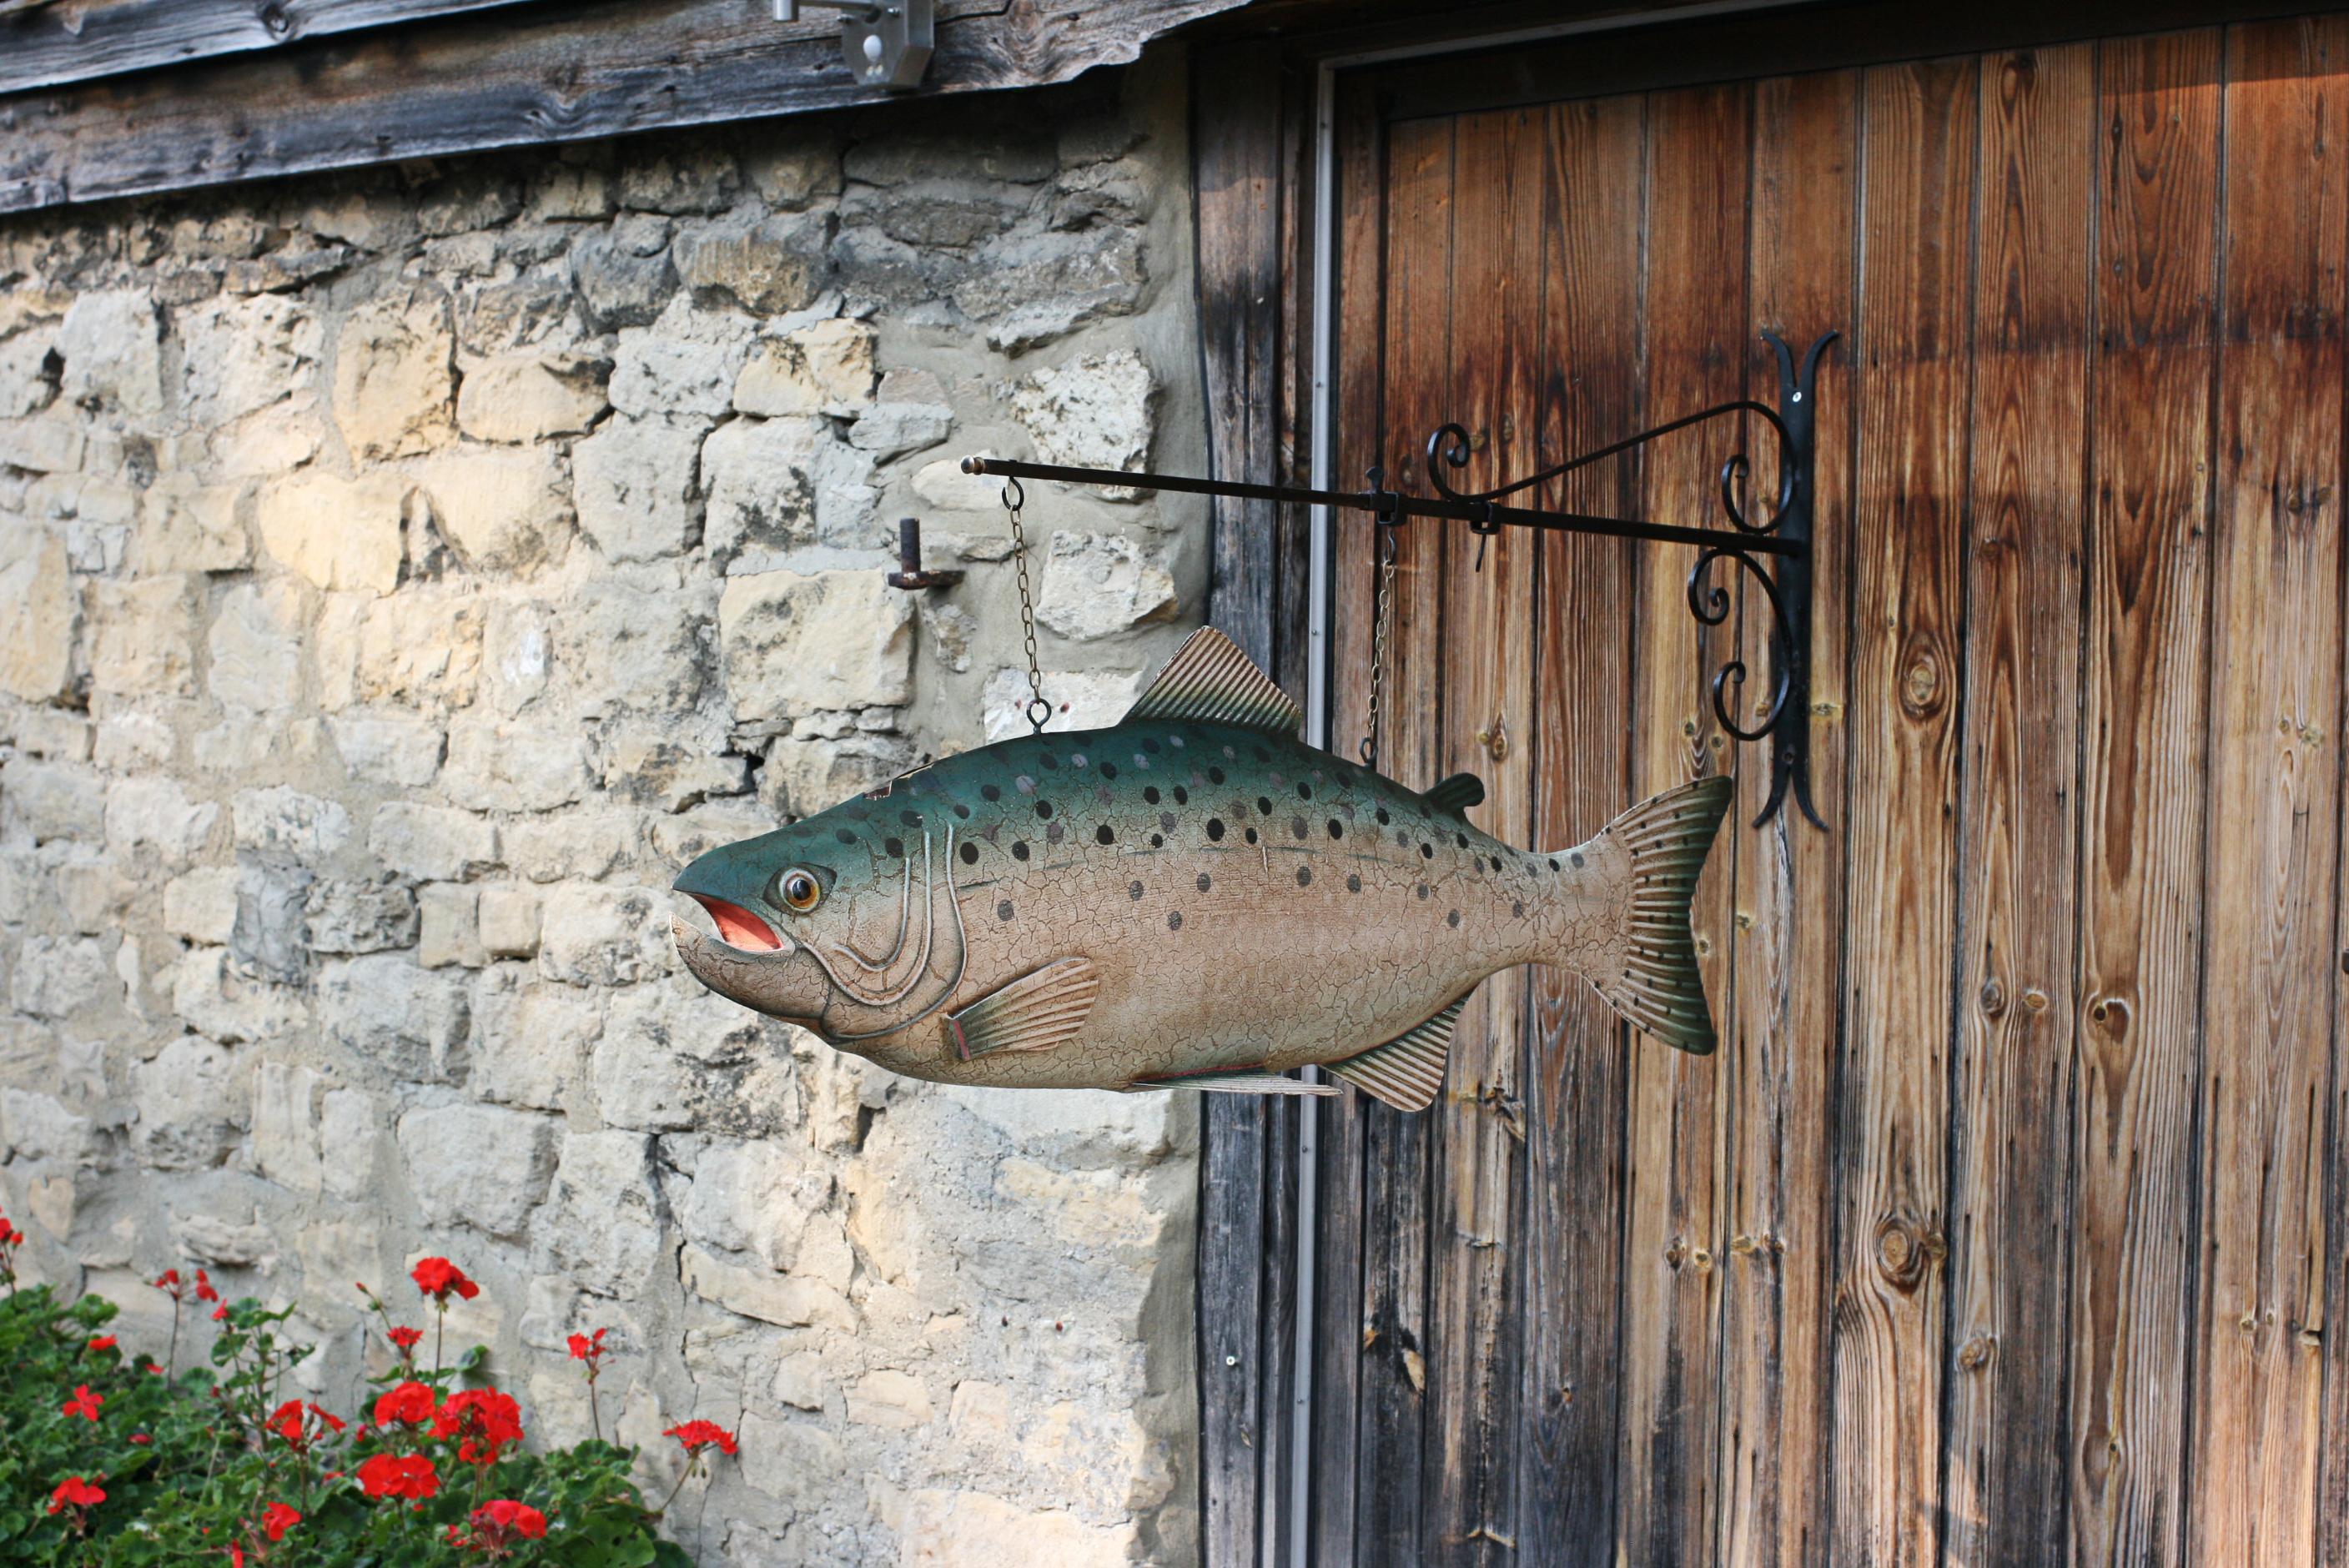 Shop sign fish model with wall bracket.
A painted 3 dimentional hollow tin fish with fins on a wrought-iron wall bracket. The fish was most probably made as a shop sign possibly for a Fishmongers, Tackle Shop, Fish & Chip Shop or even a pub sign.